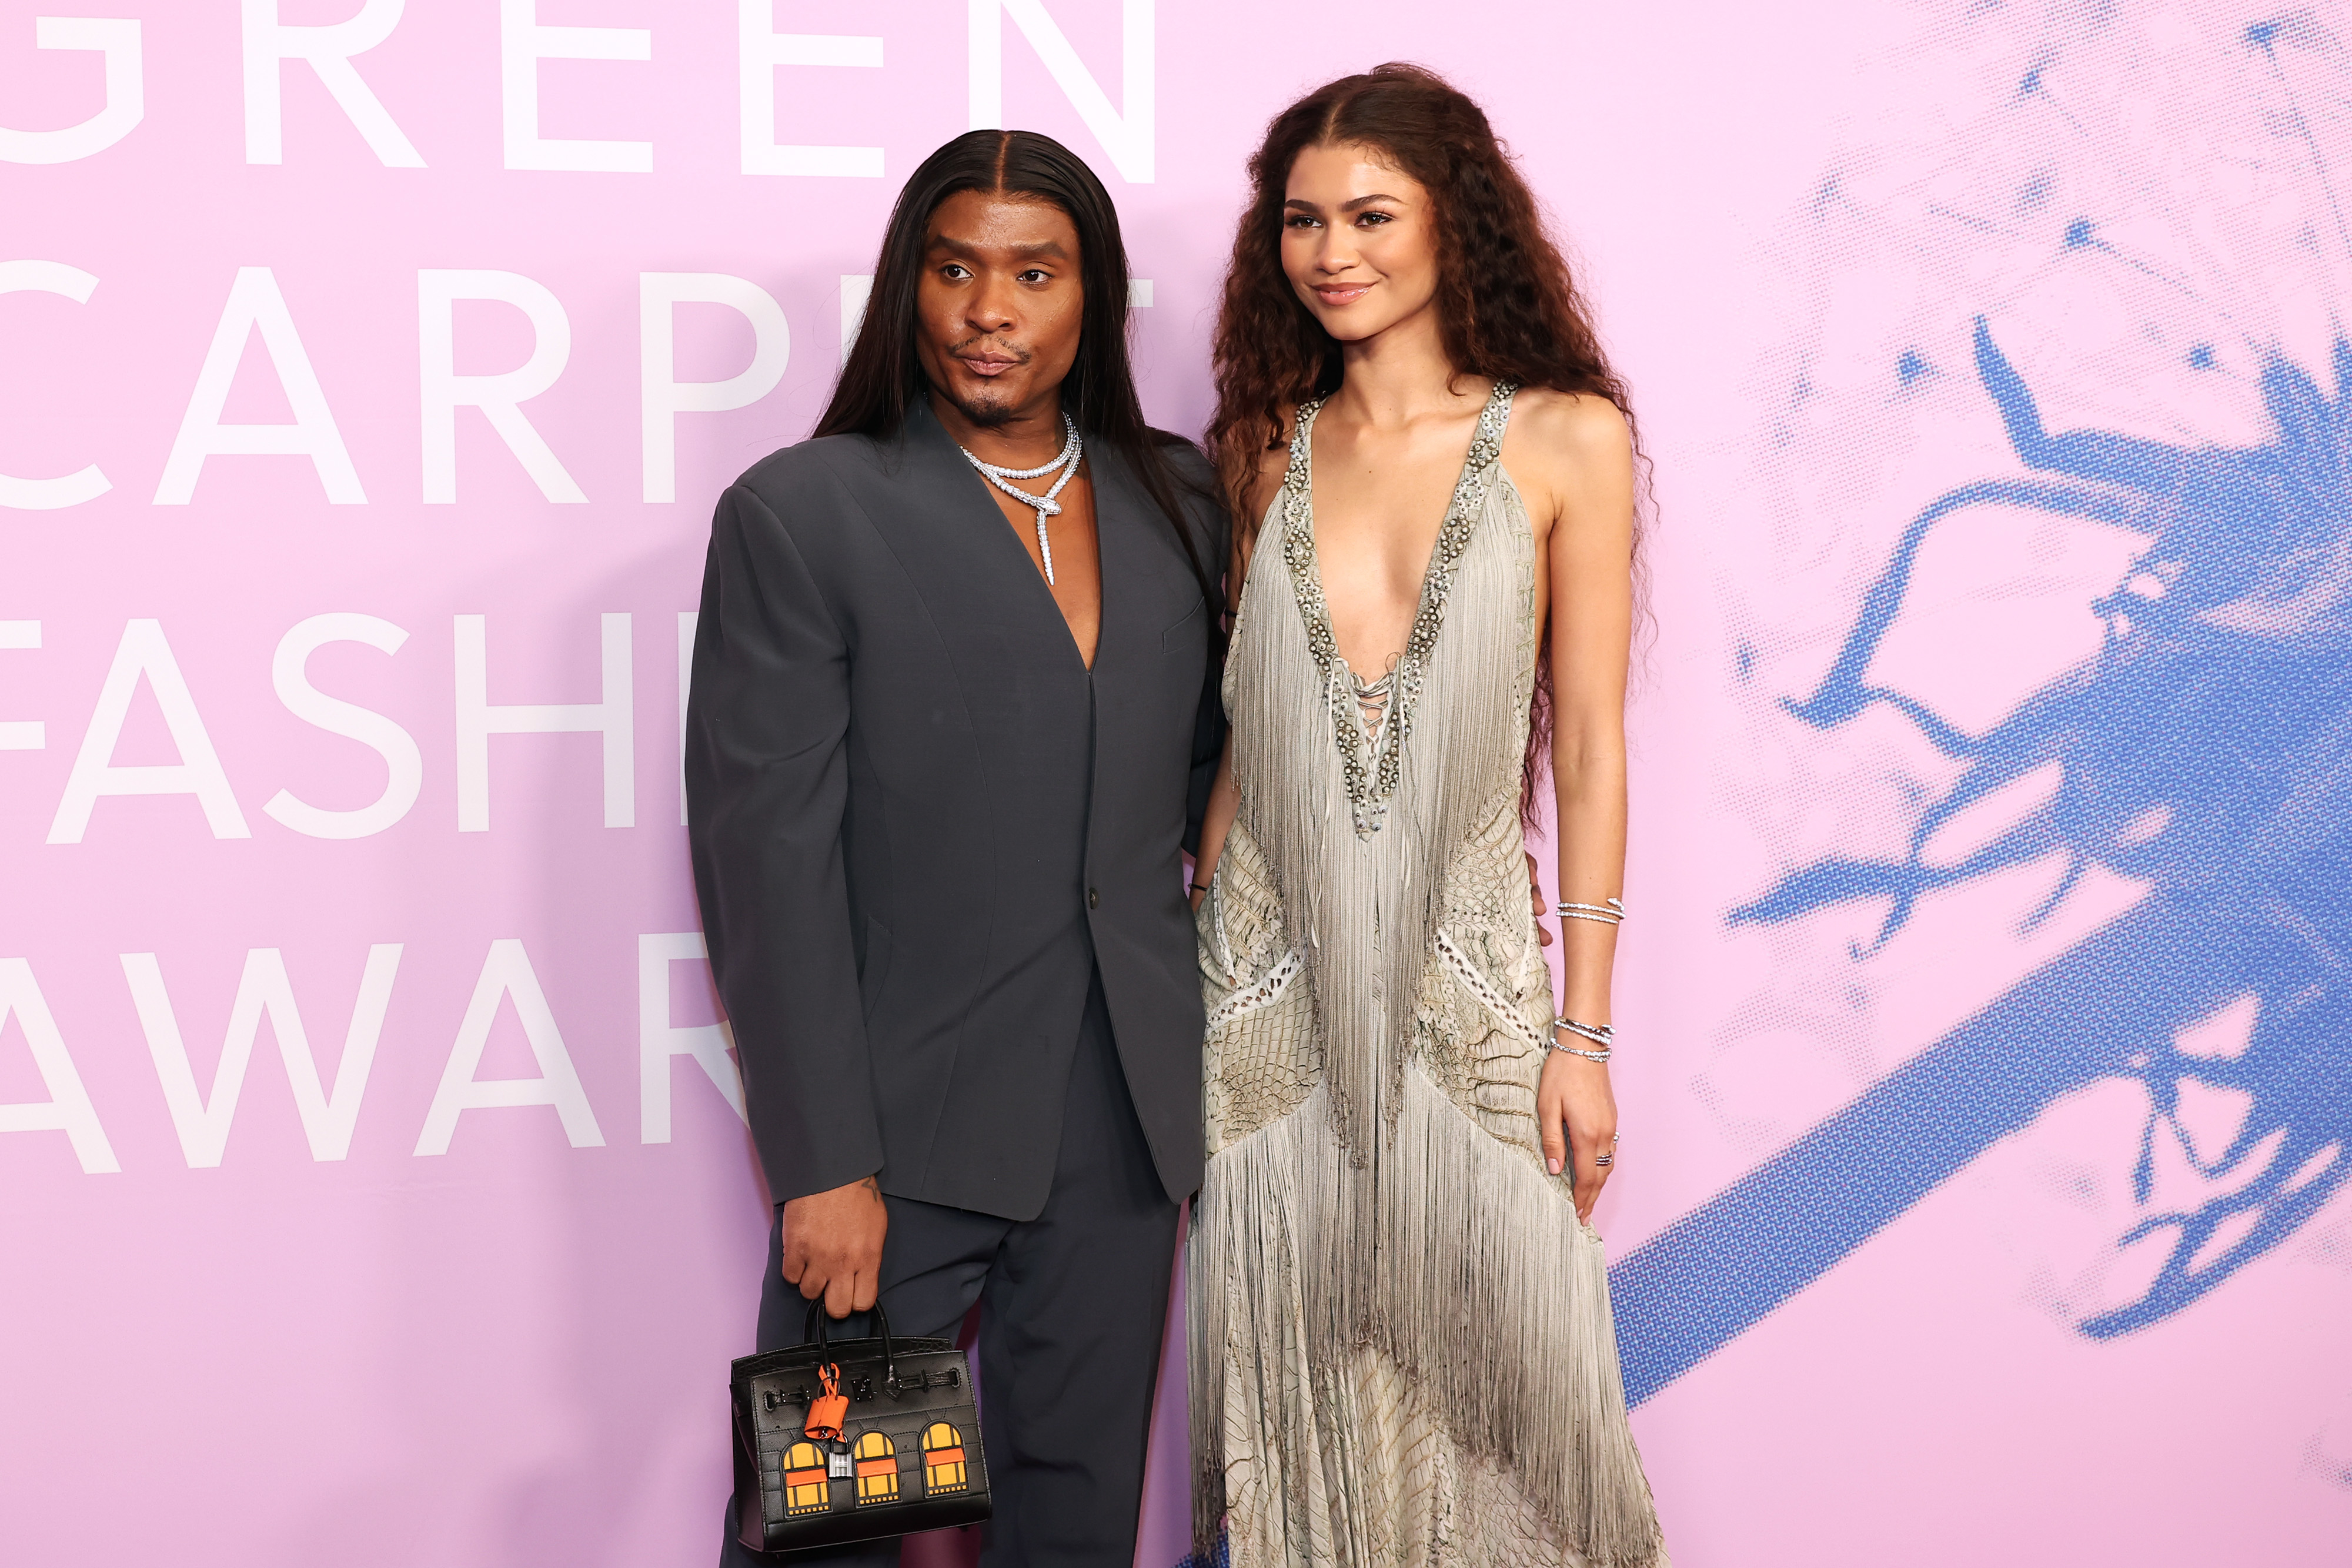 Law Roach and Zendaya at an event